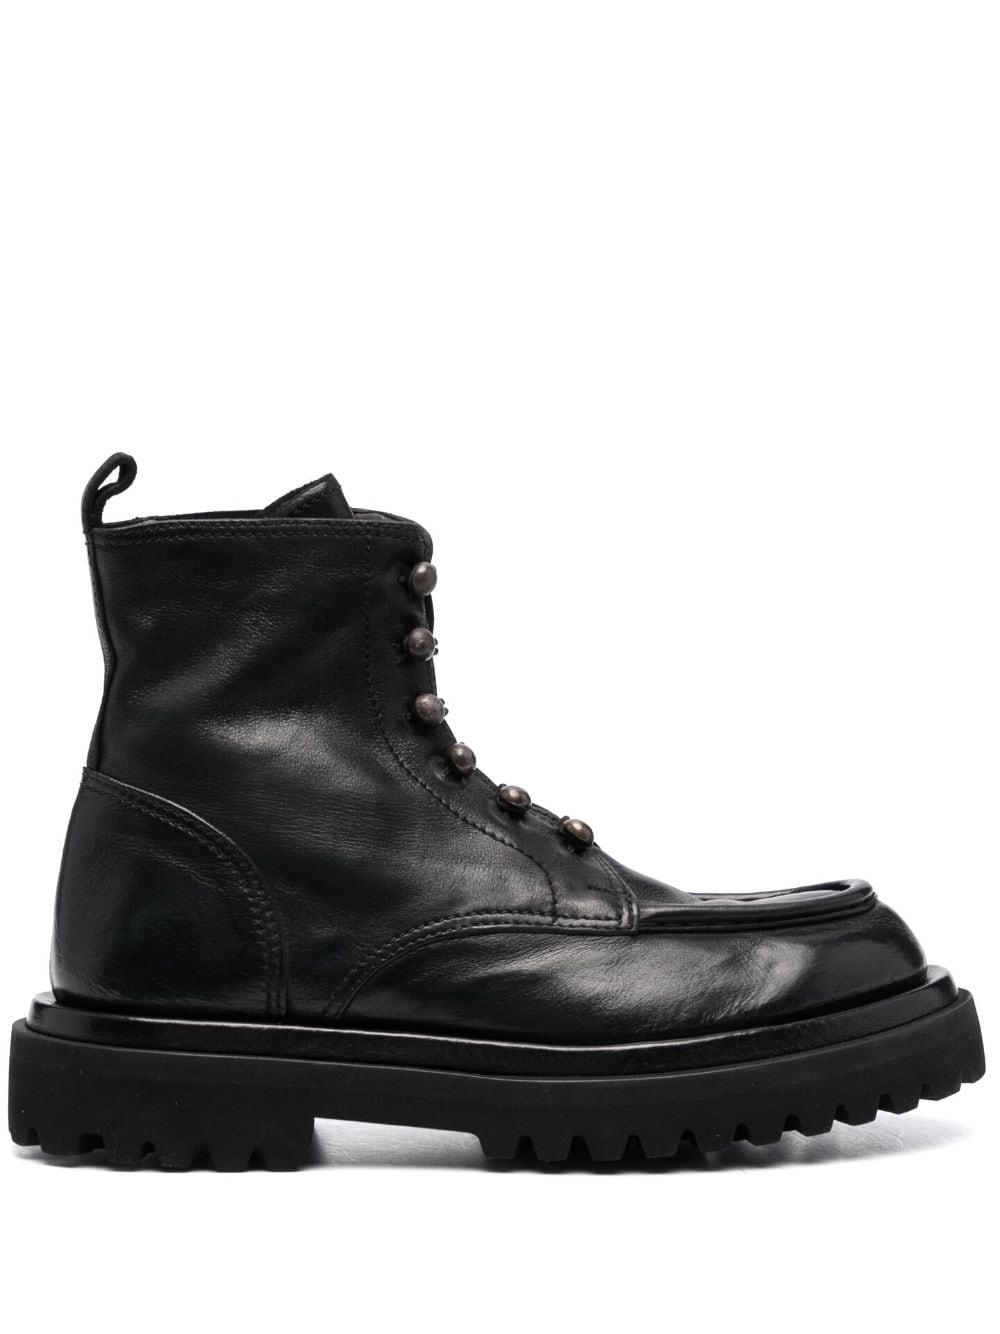 Image 1 of Officine Creative Wisal 103 leather ankle boots